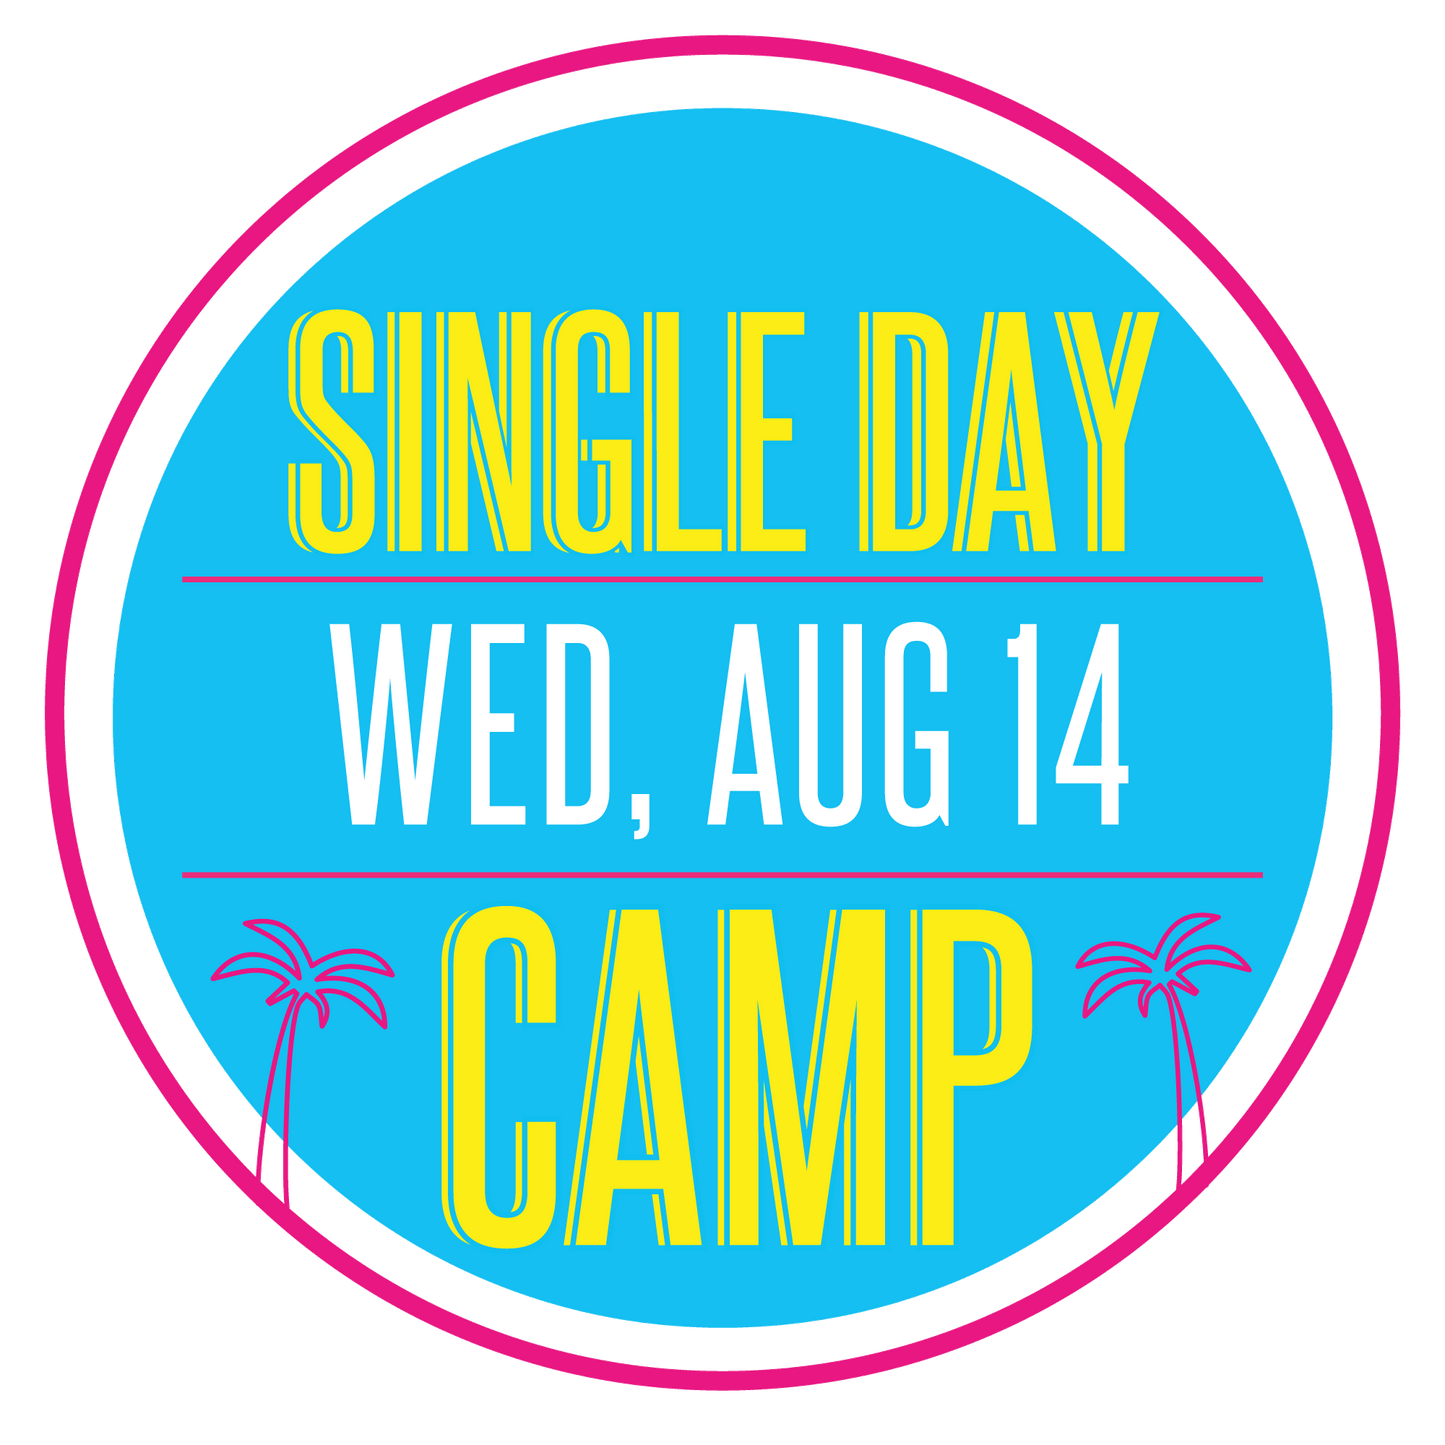 Single Day Sewing Workshop: Wednesday, August 14, 9am-3pm